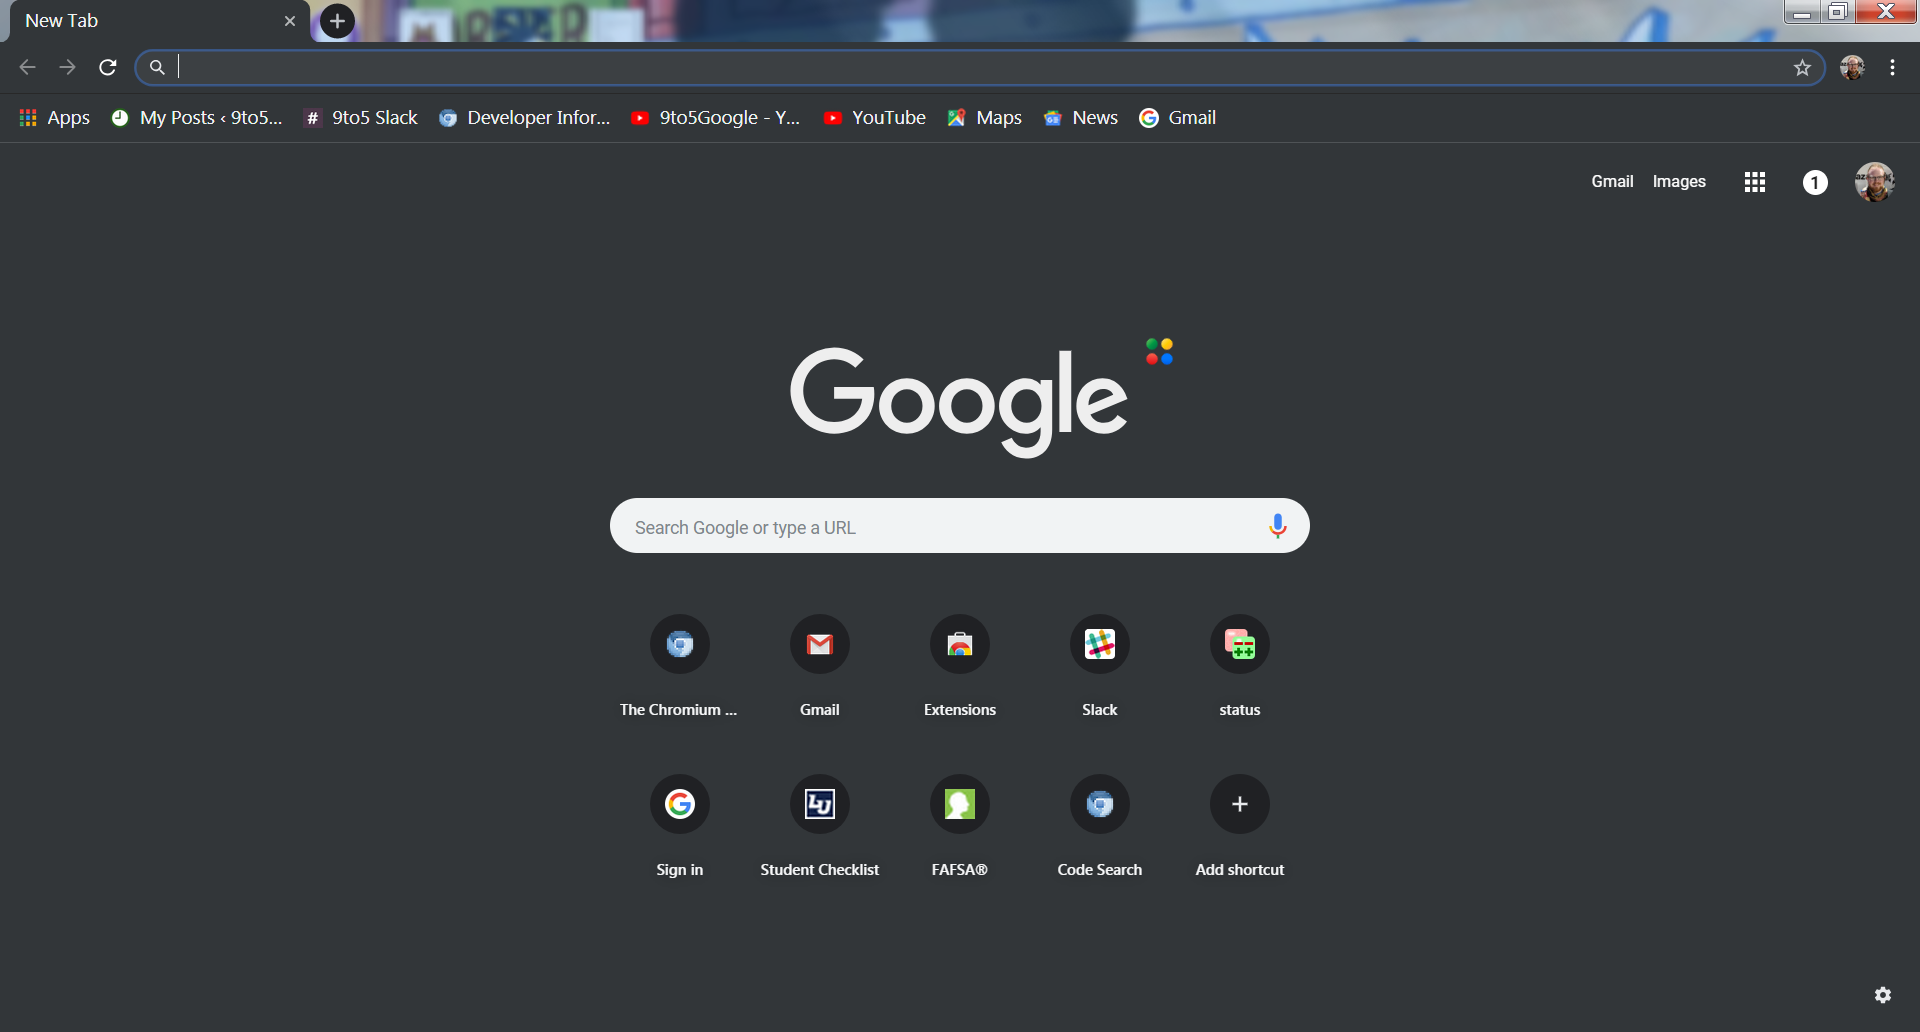 You can enable Chrome's dark mode on Windows [Gallery] - 9to5Google